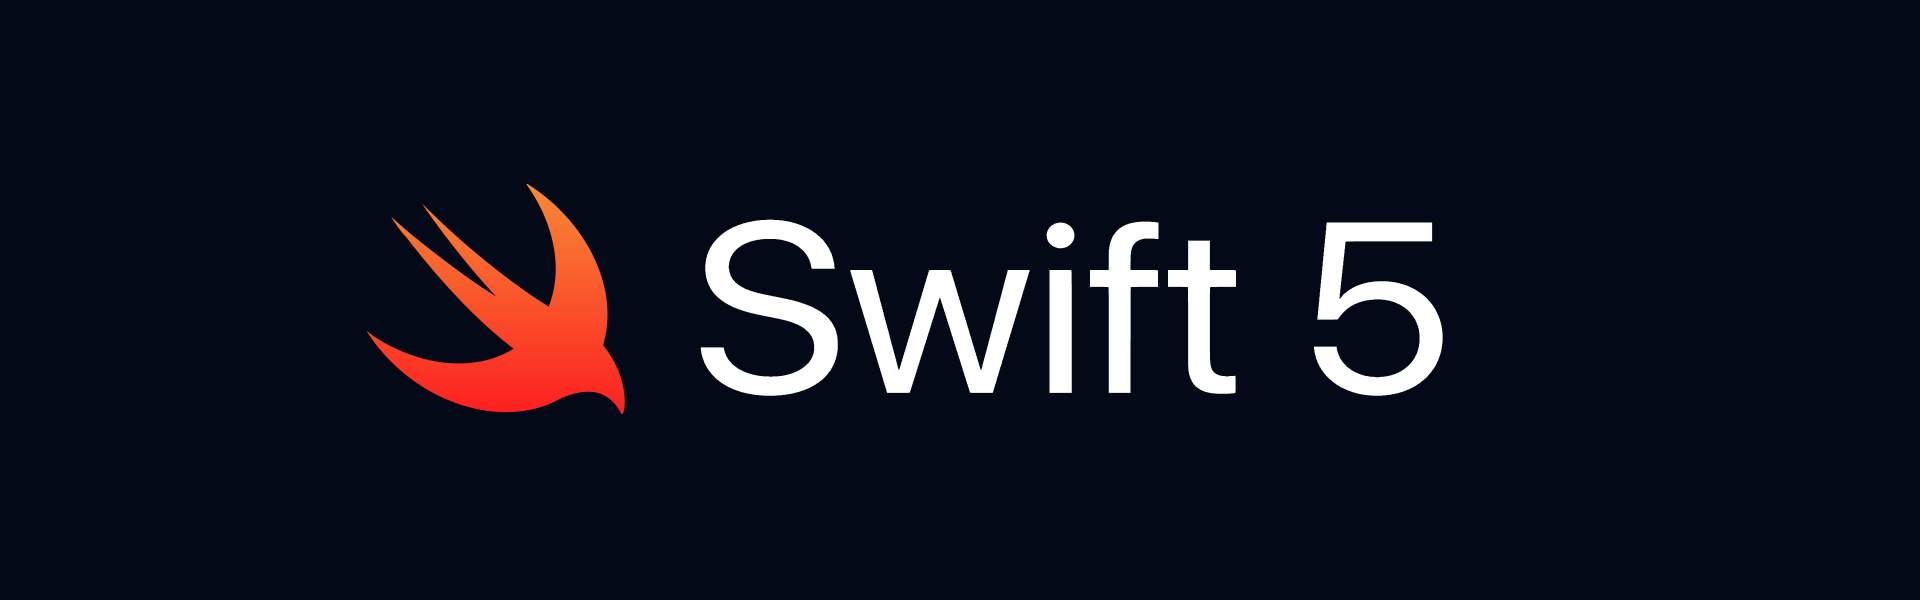 Augmented Reality with Swift 5 – How to Start